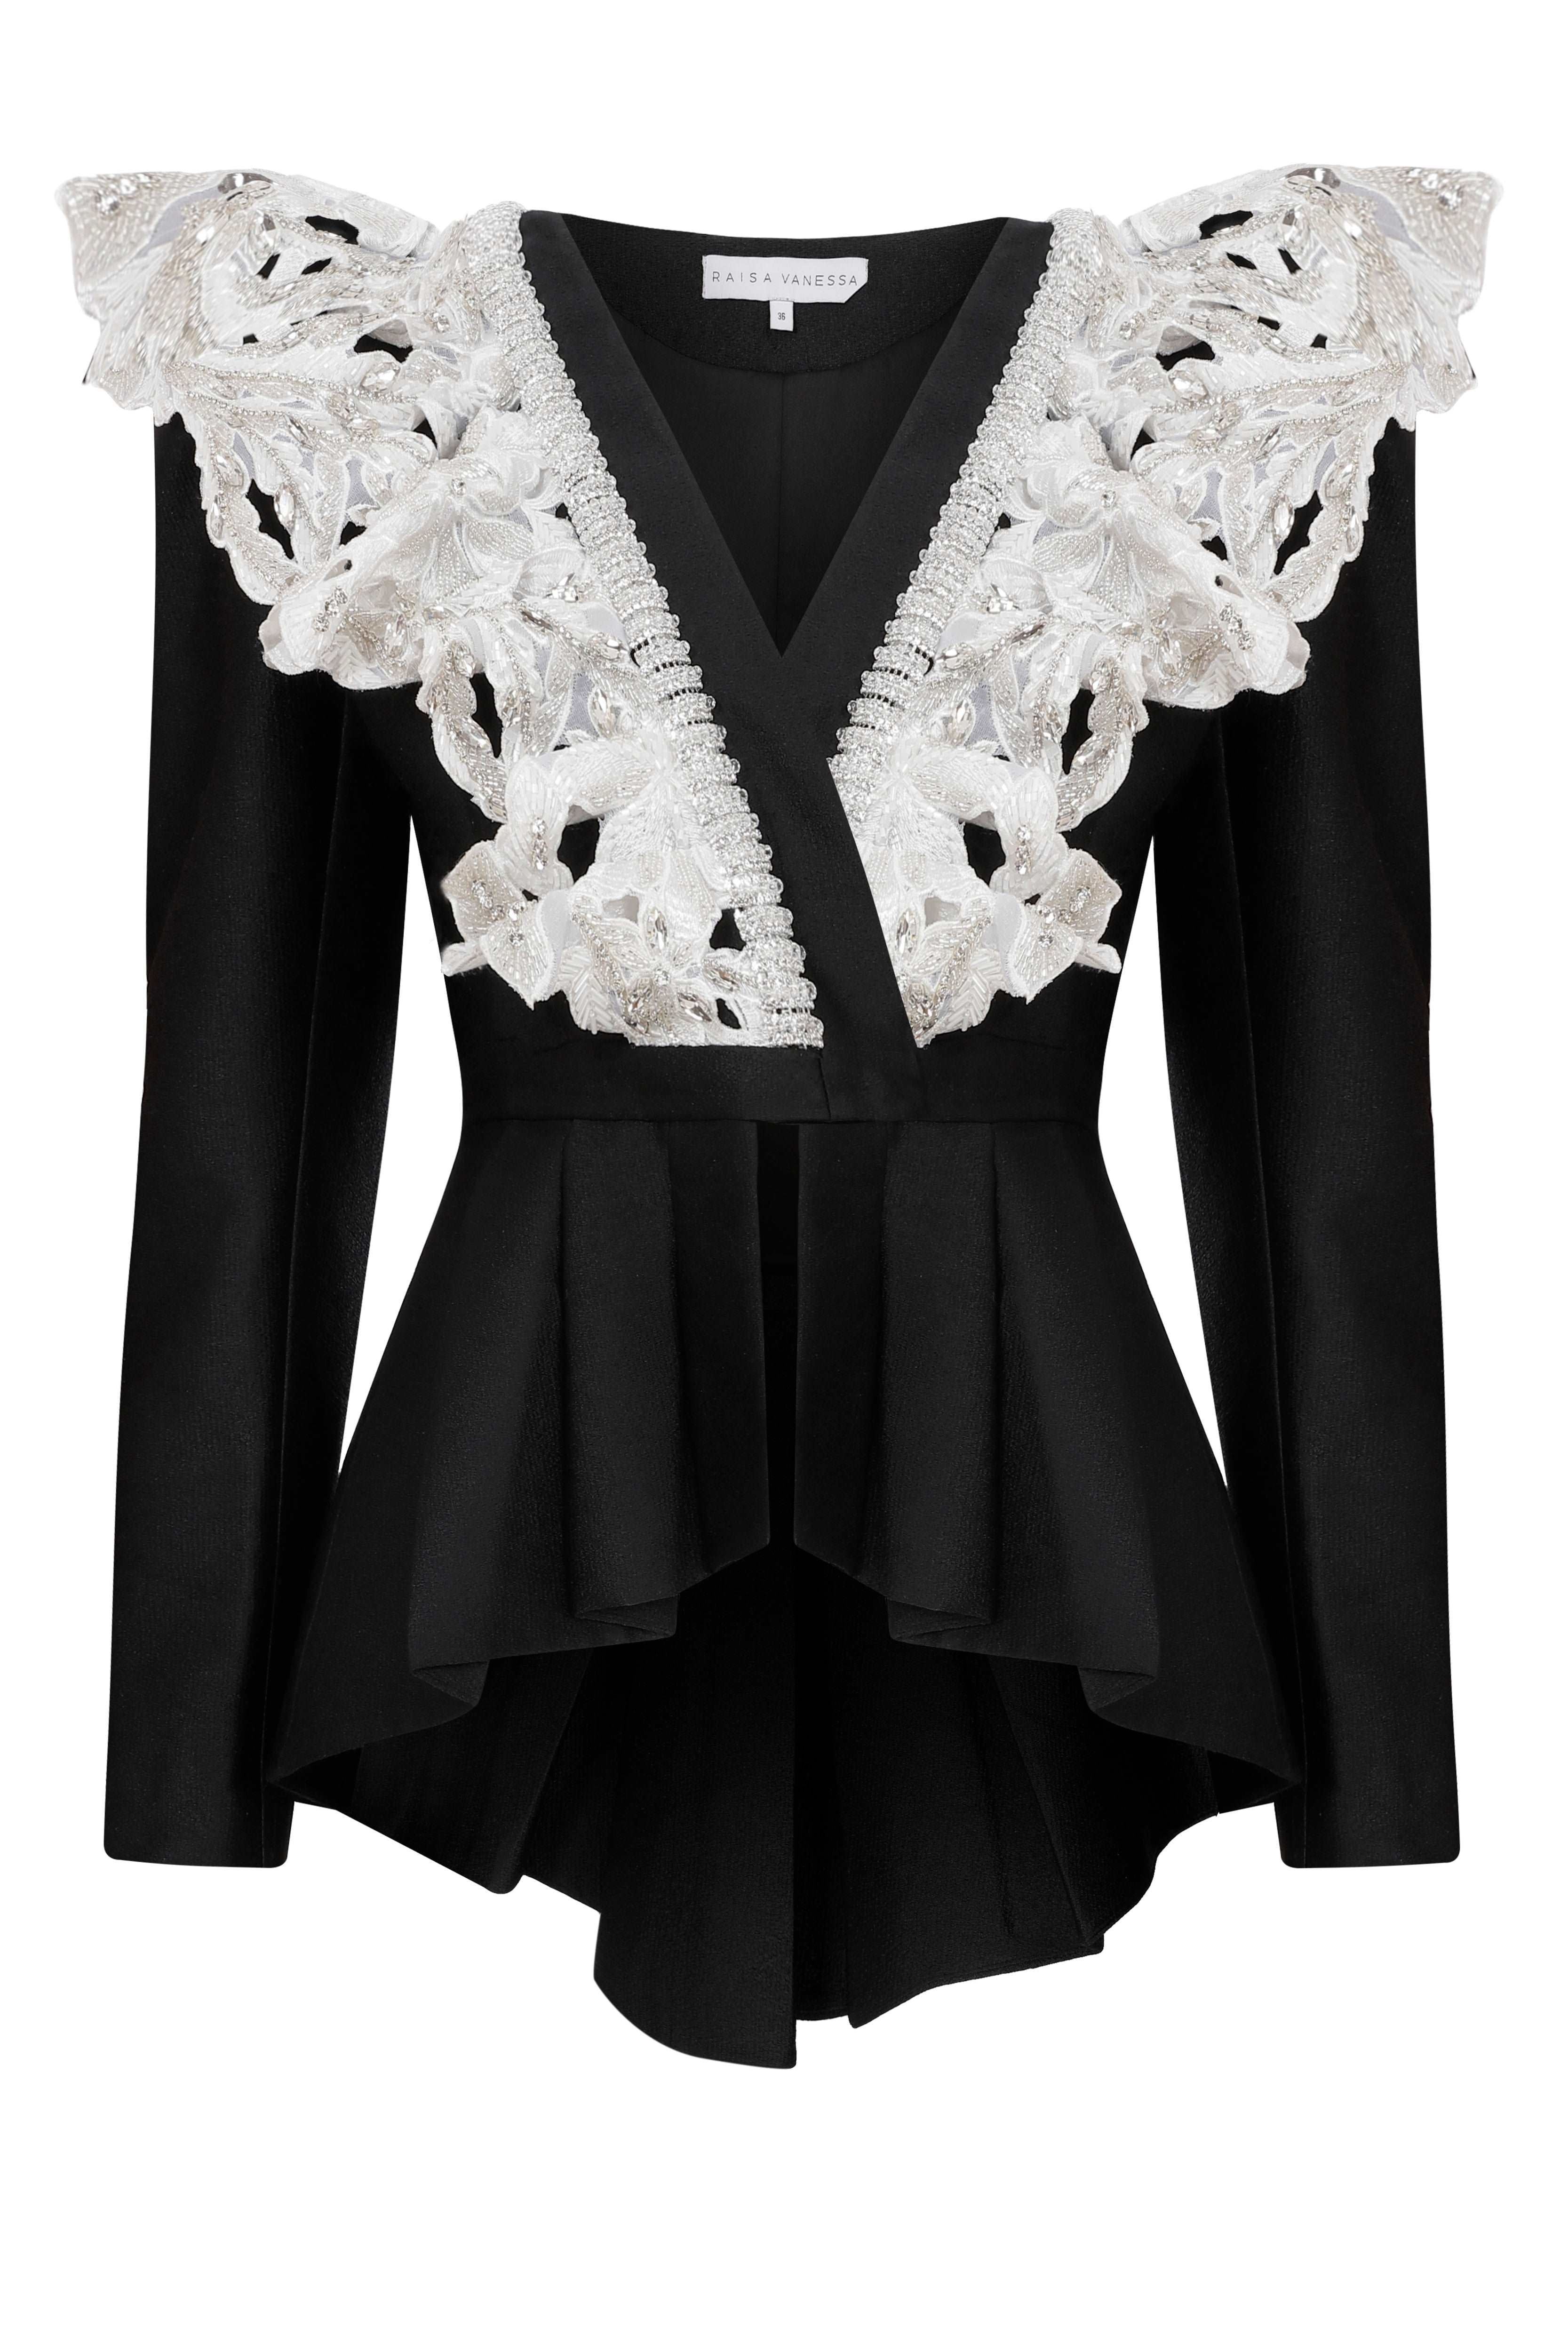 Black V-neck Jacket with White Laced Strass Embellished Embroidery